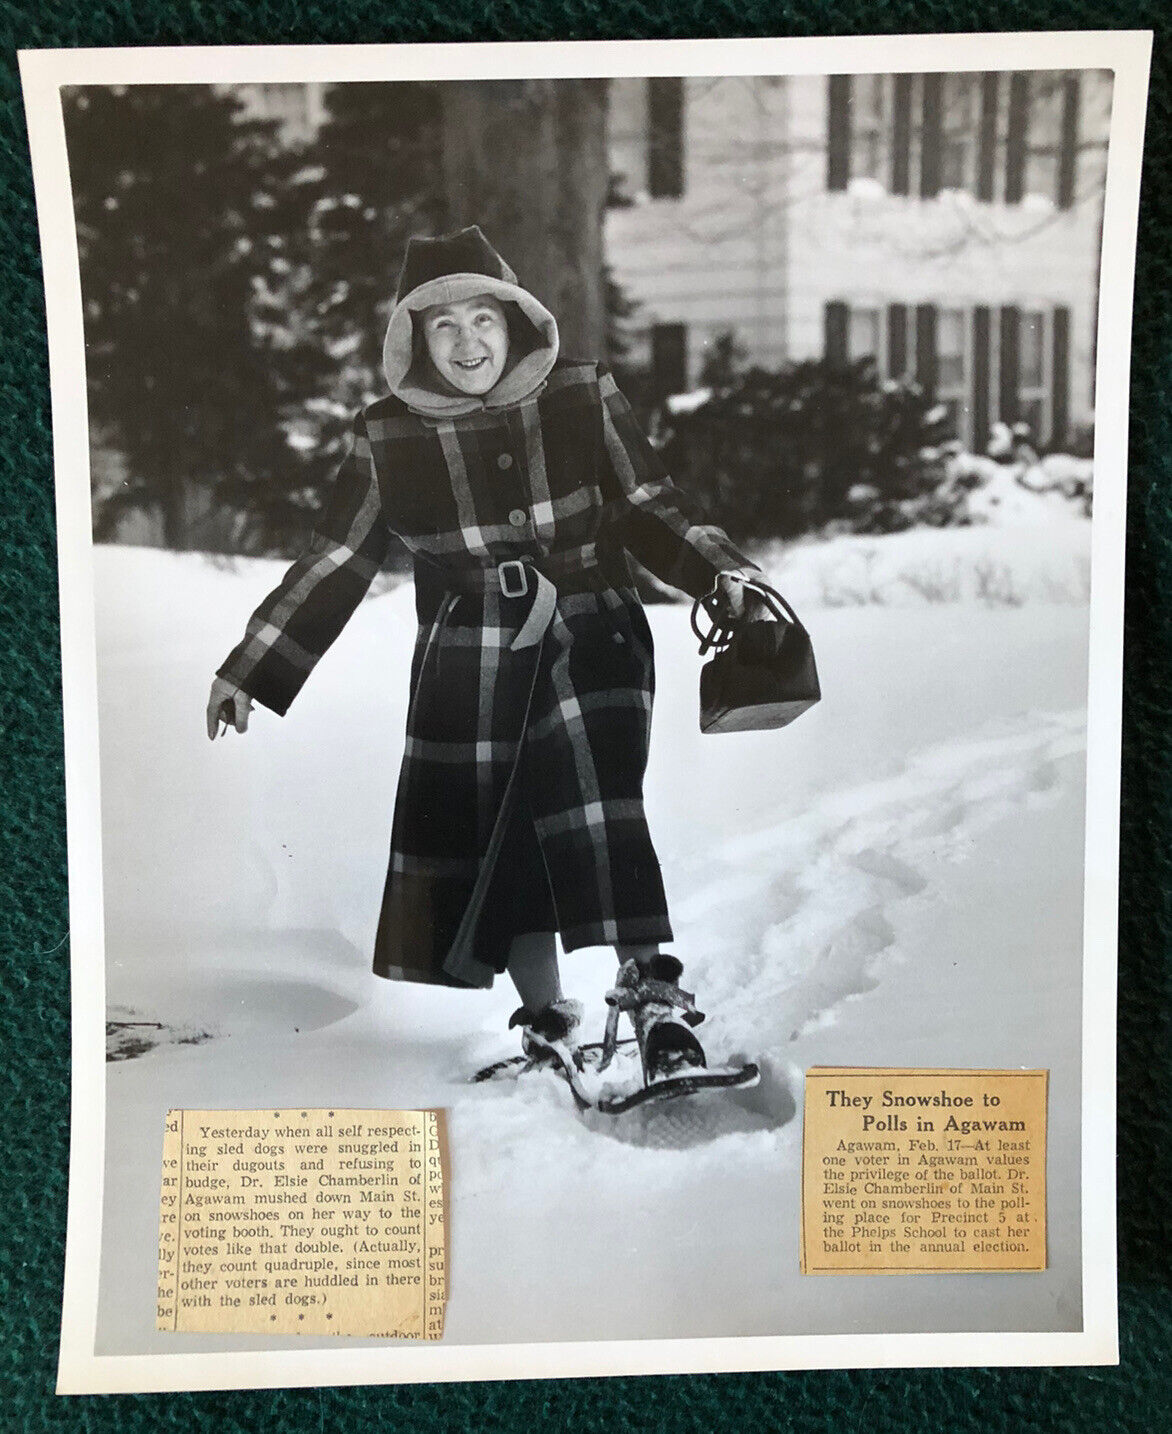 AGAWAM MA 1952 PHOTOGRAPH Dr. Elsie Chamberlin GOING TO VOTE Wearing Snowshoes